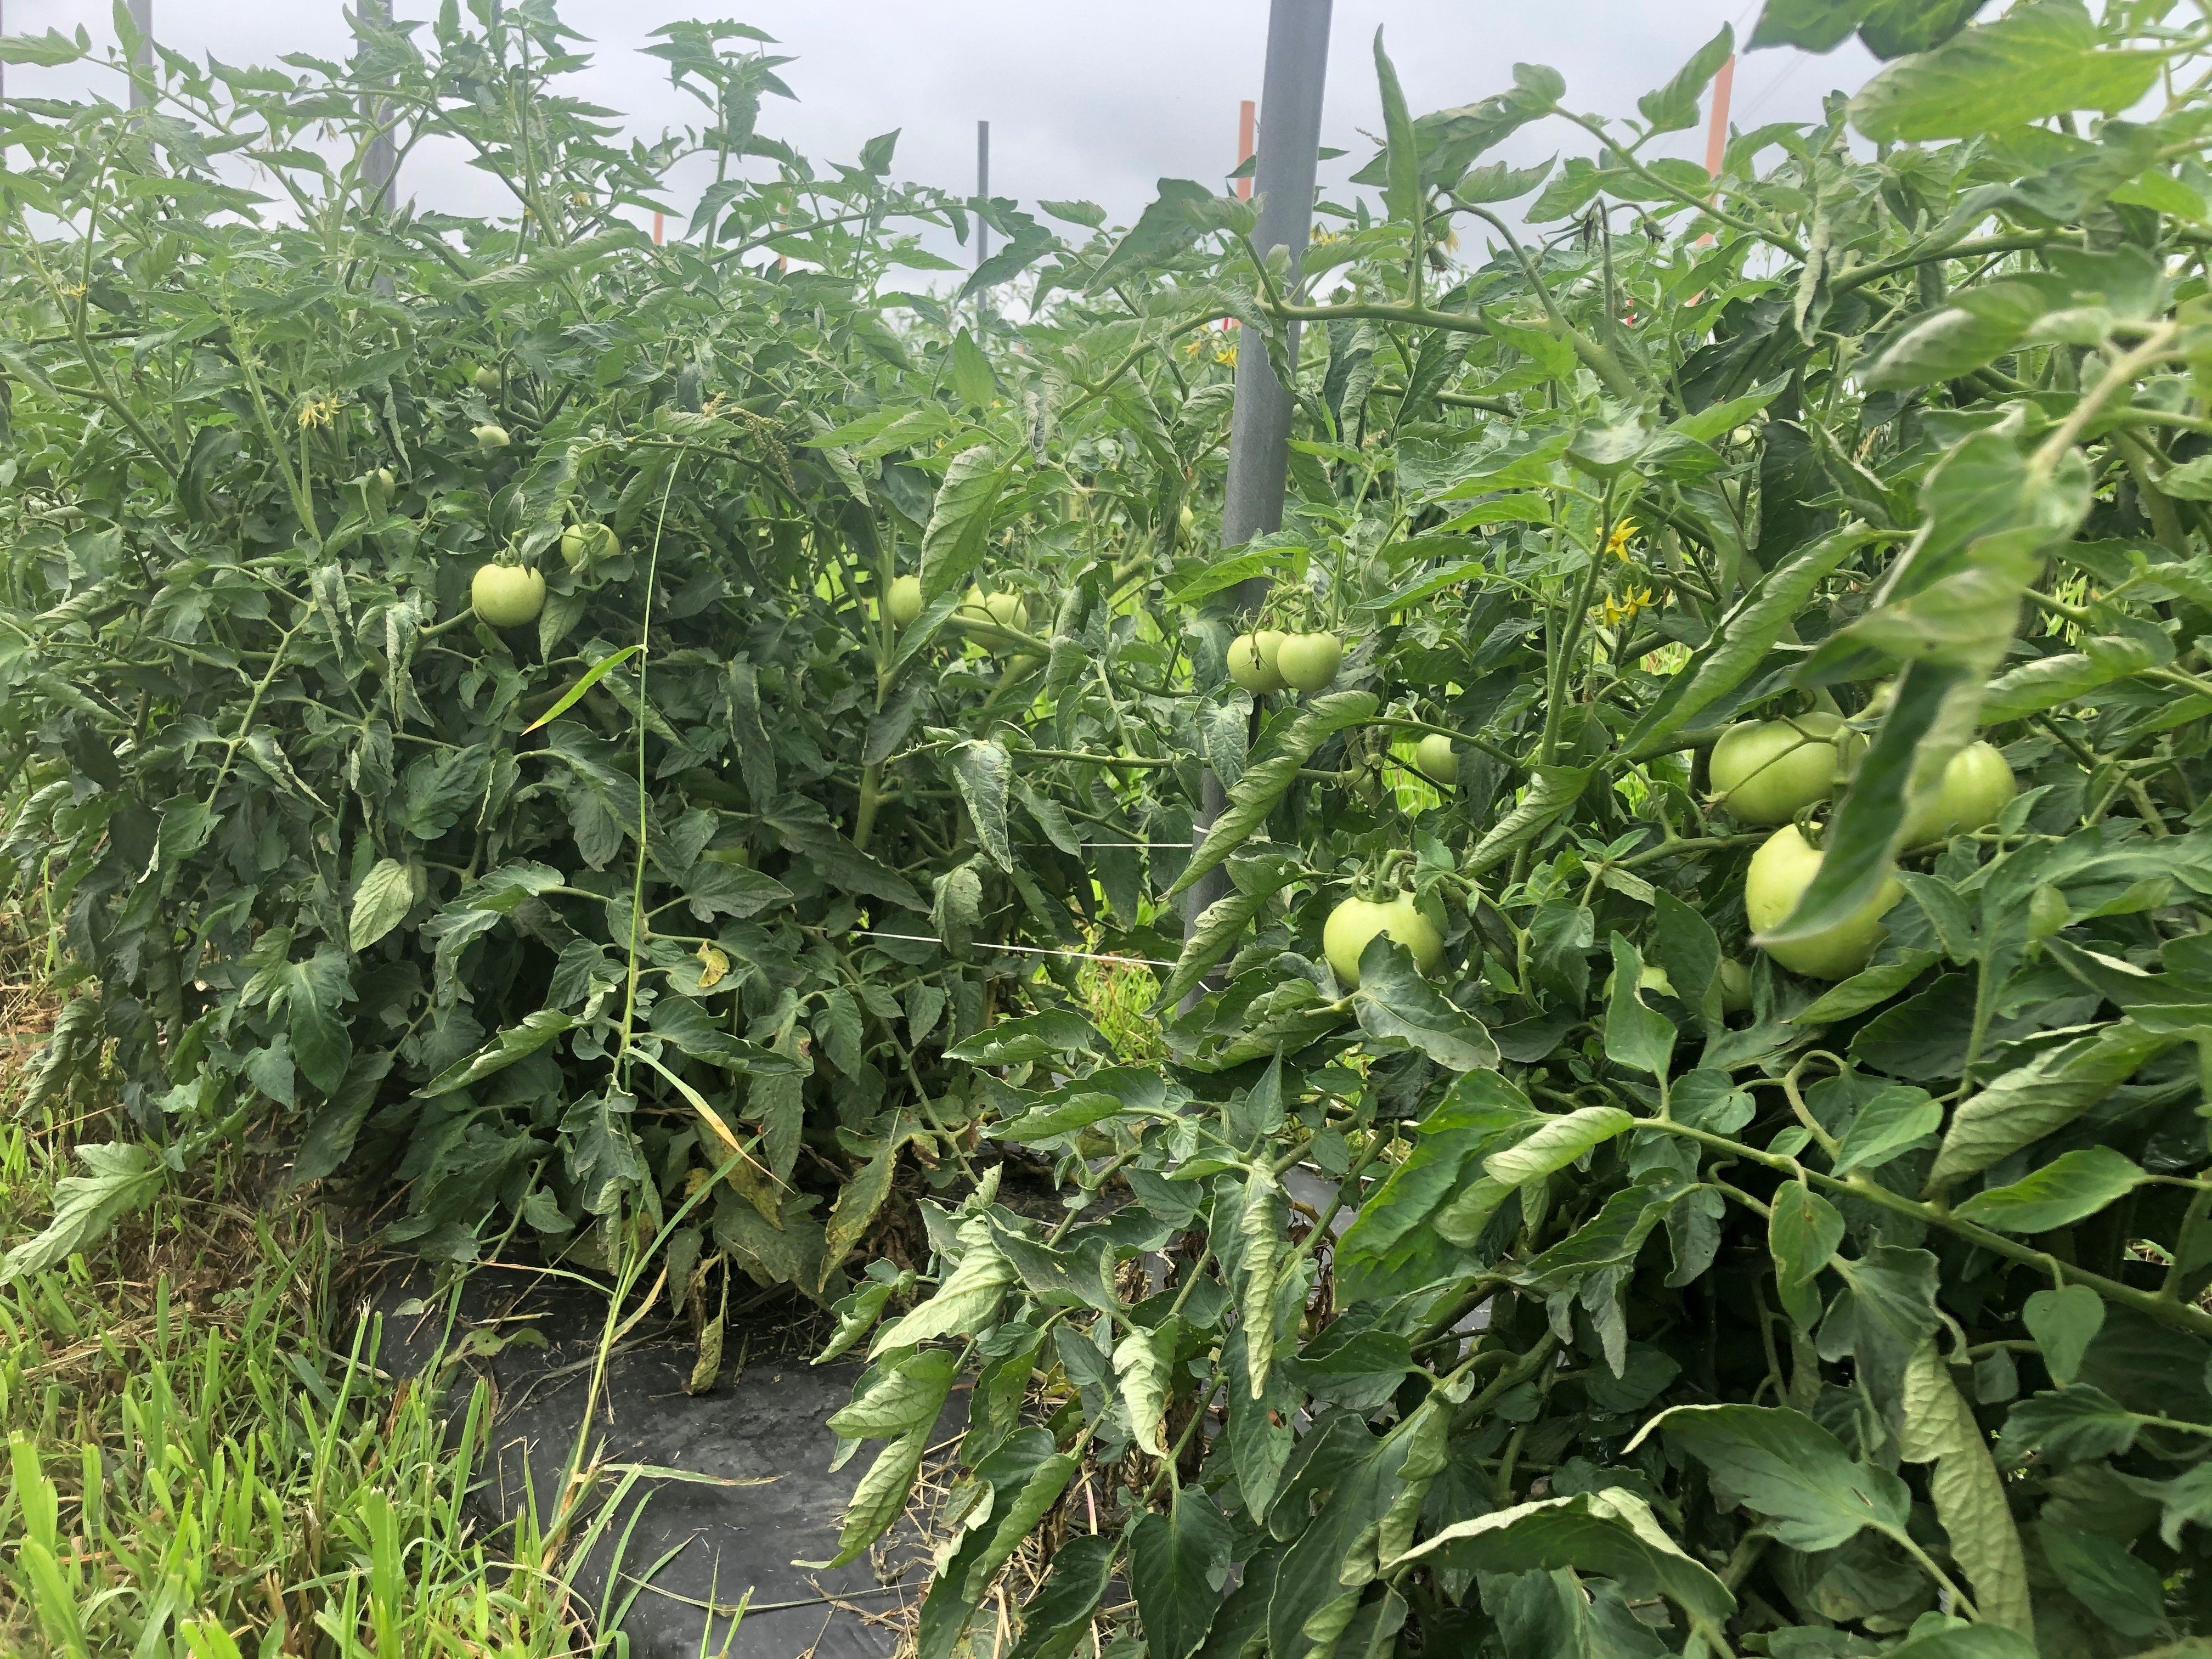 Previous Happening: Farm Happenings for July 18, 2020